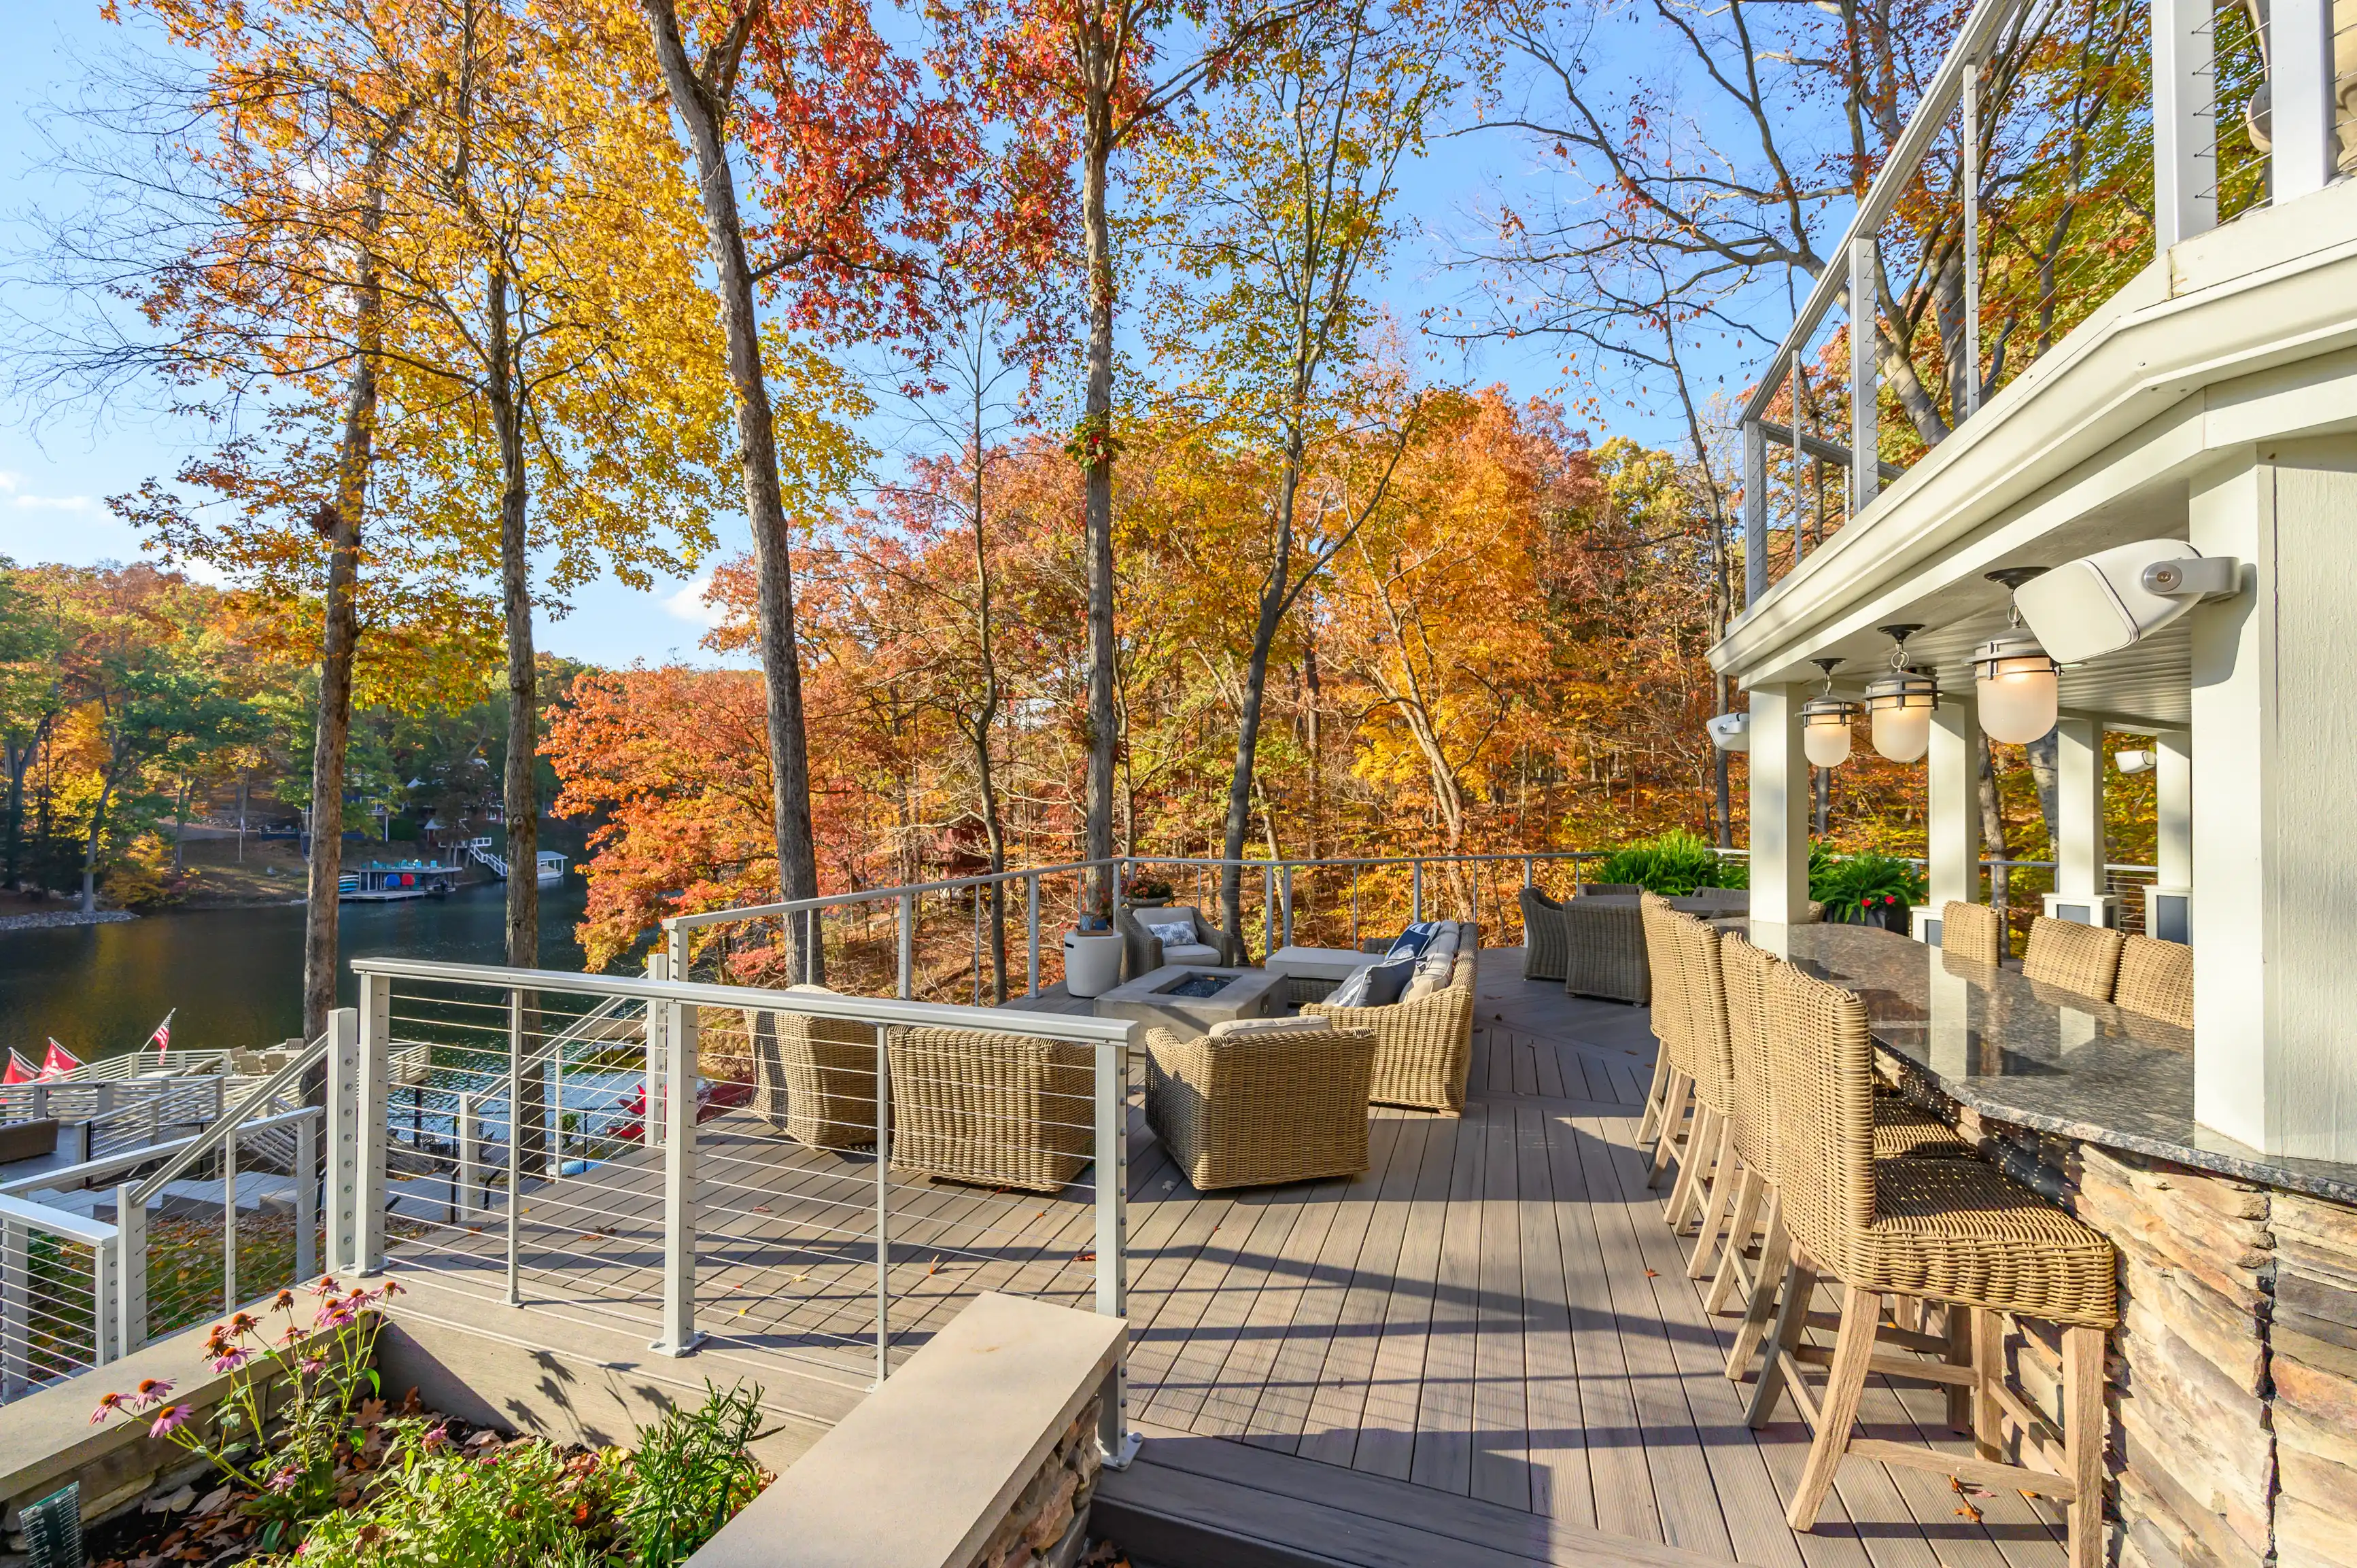 Spacious outdoor deck with wicker furniture overlooking a lake surrounded by autumn-colored trees.